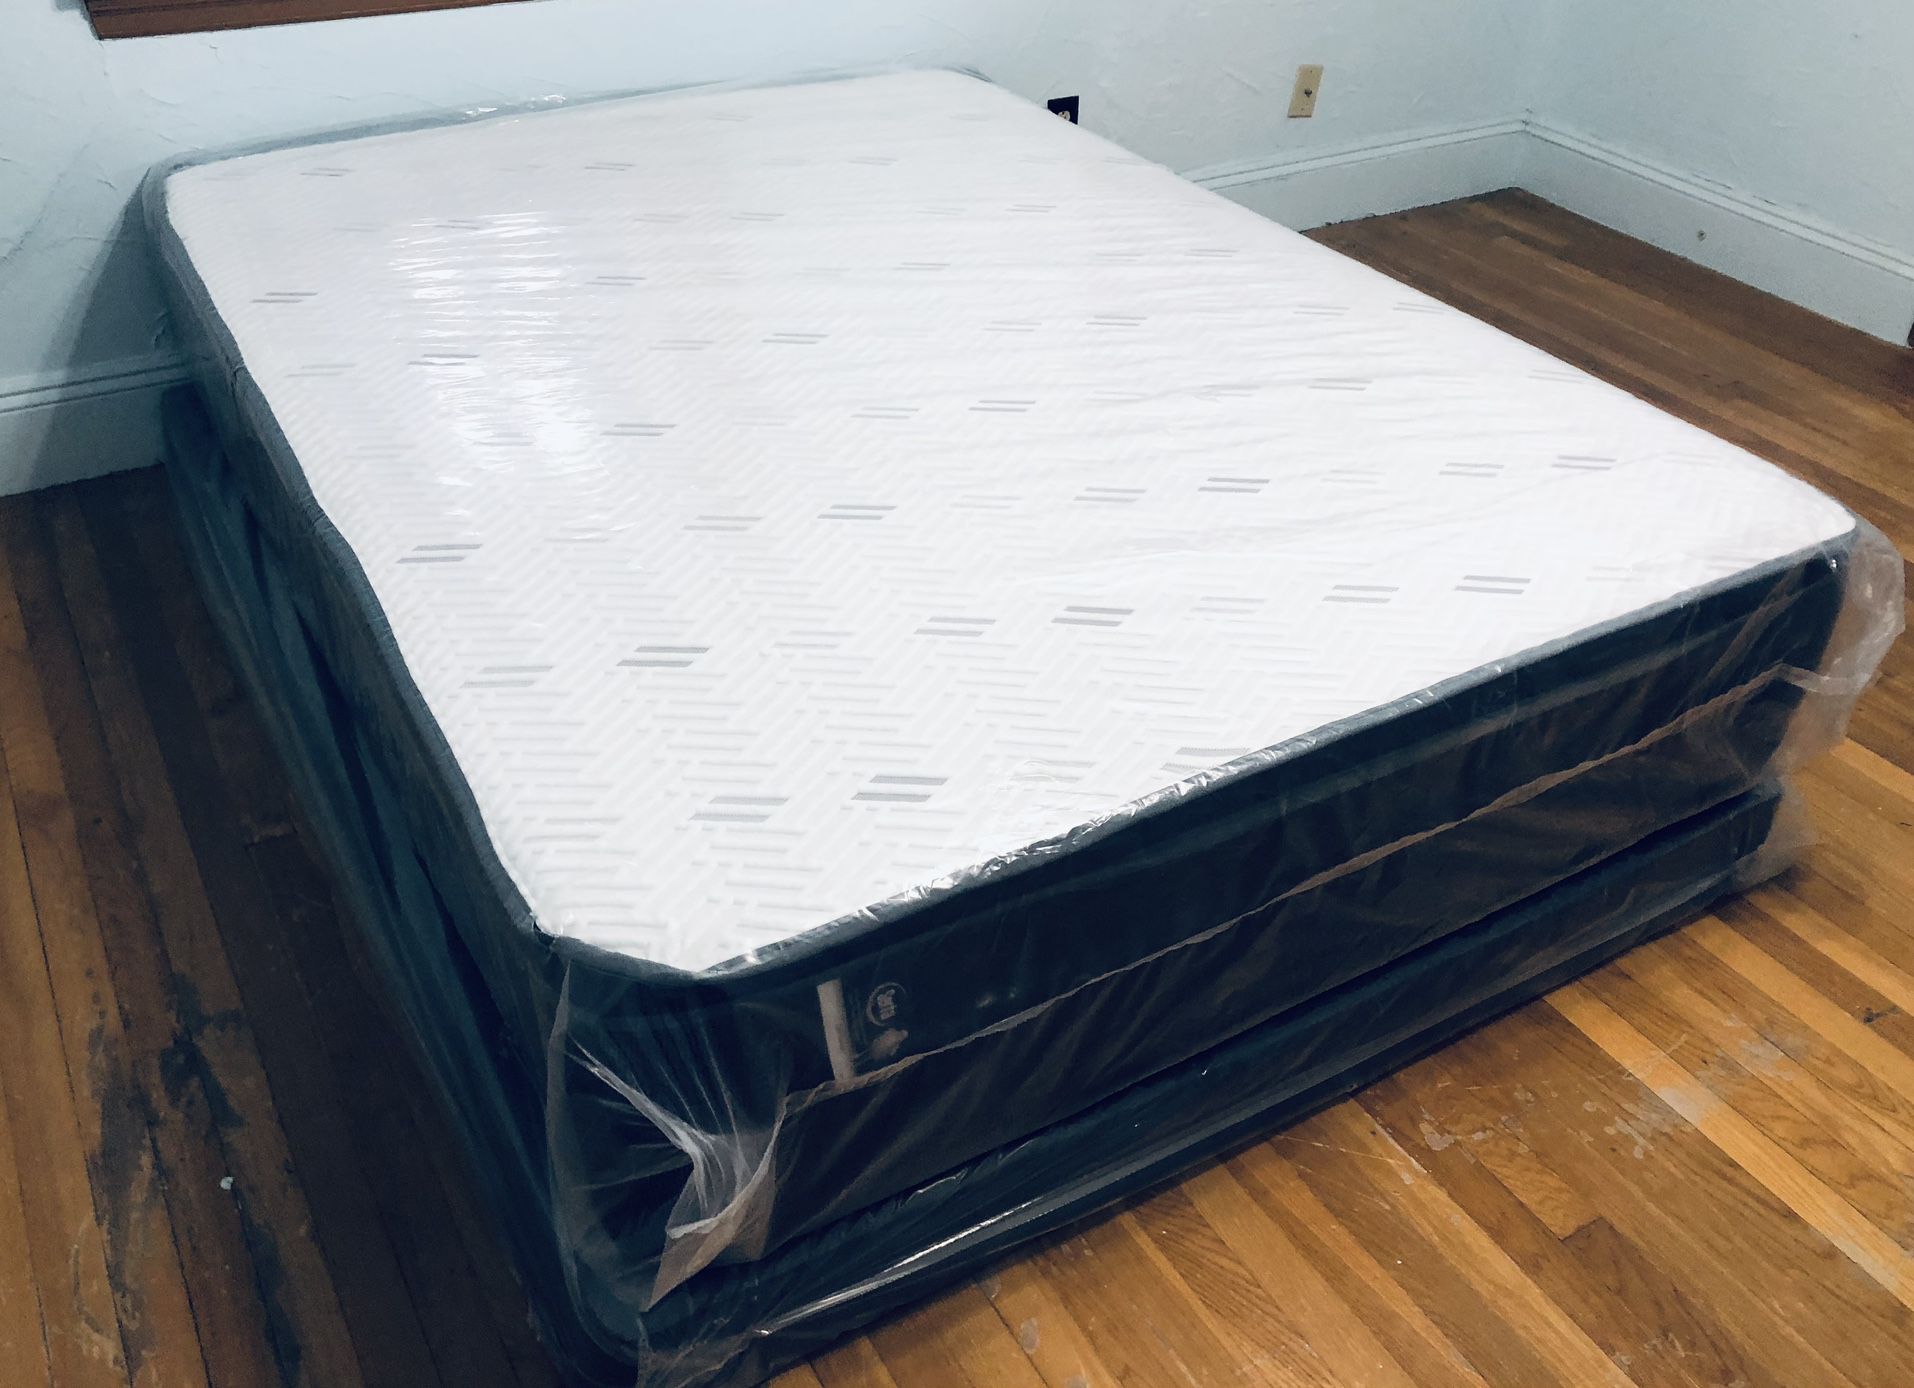 Queen Size Mattress Pillow top  Thick 13”With Regular Box Spring Brand New We finance We deliver all Cities!